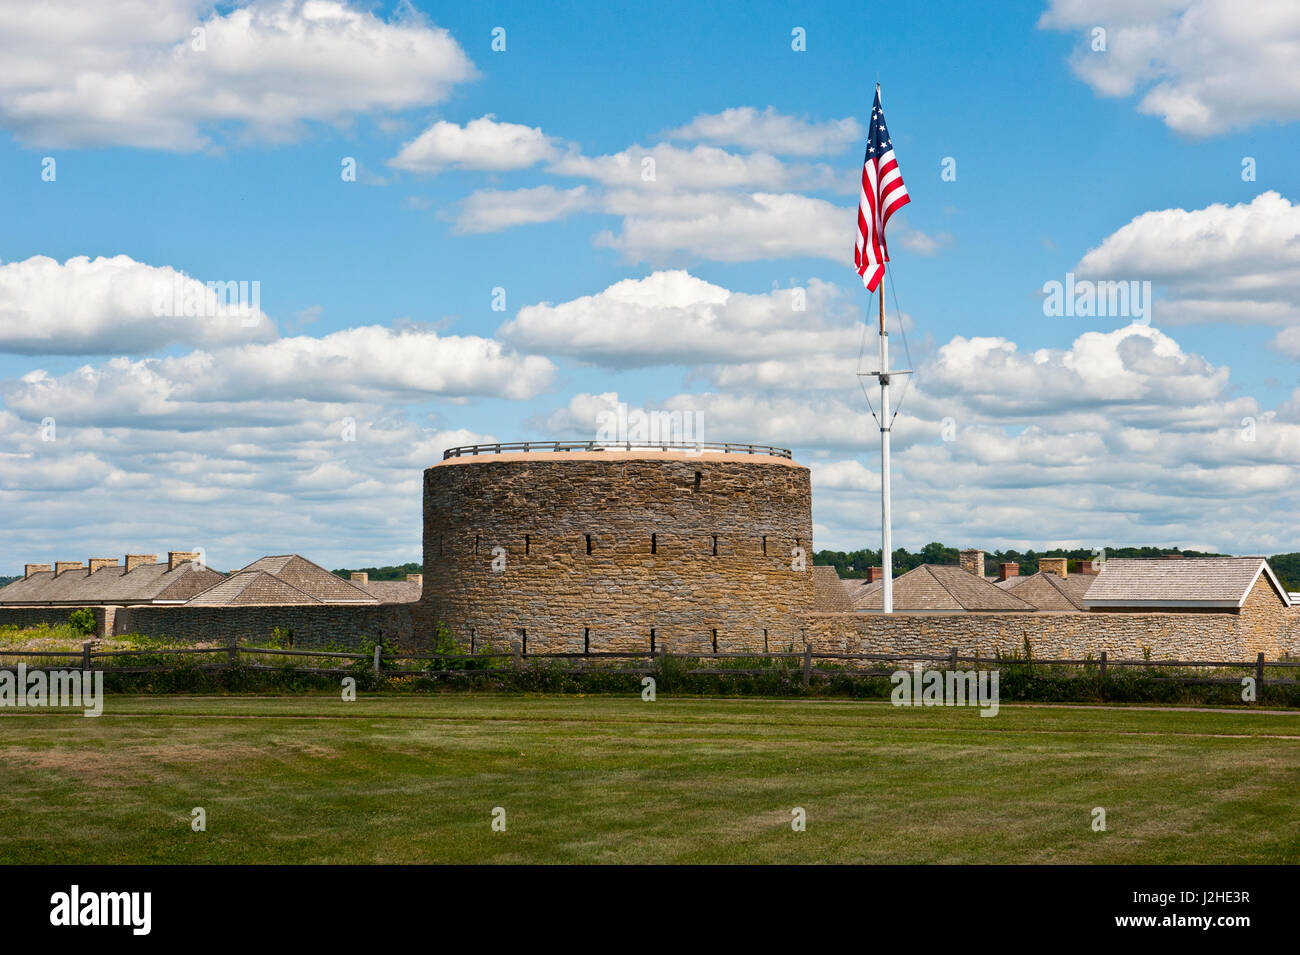 Minnesota, Minneapolis Fort Snelling, Round Tower and Flagpole Stock Photo